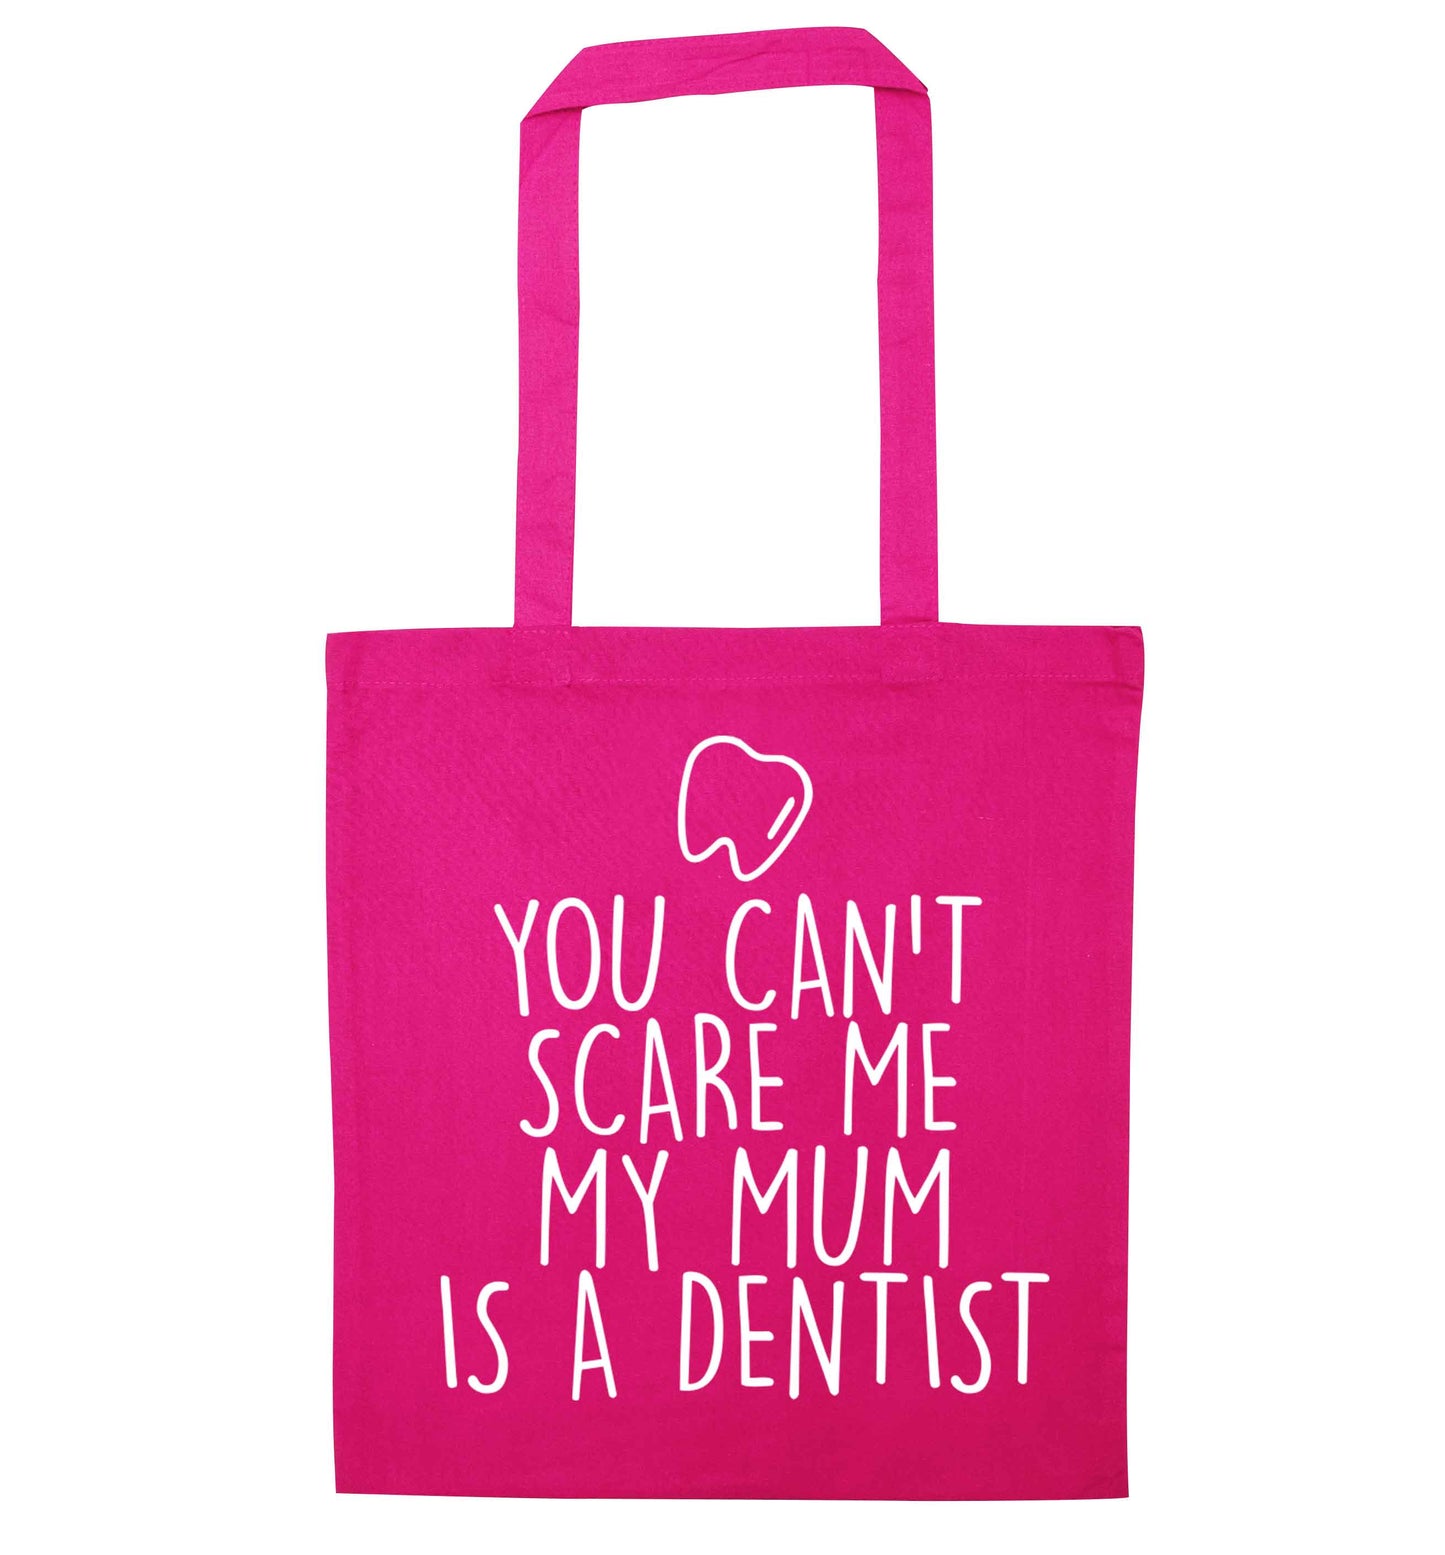 Minty Kisses Tooth Fairy (a) pink tote bag